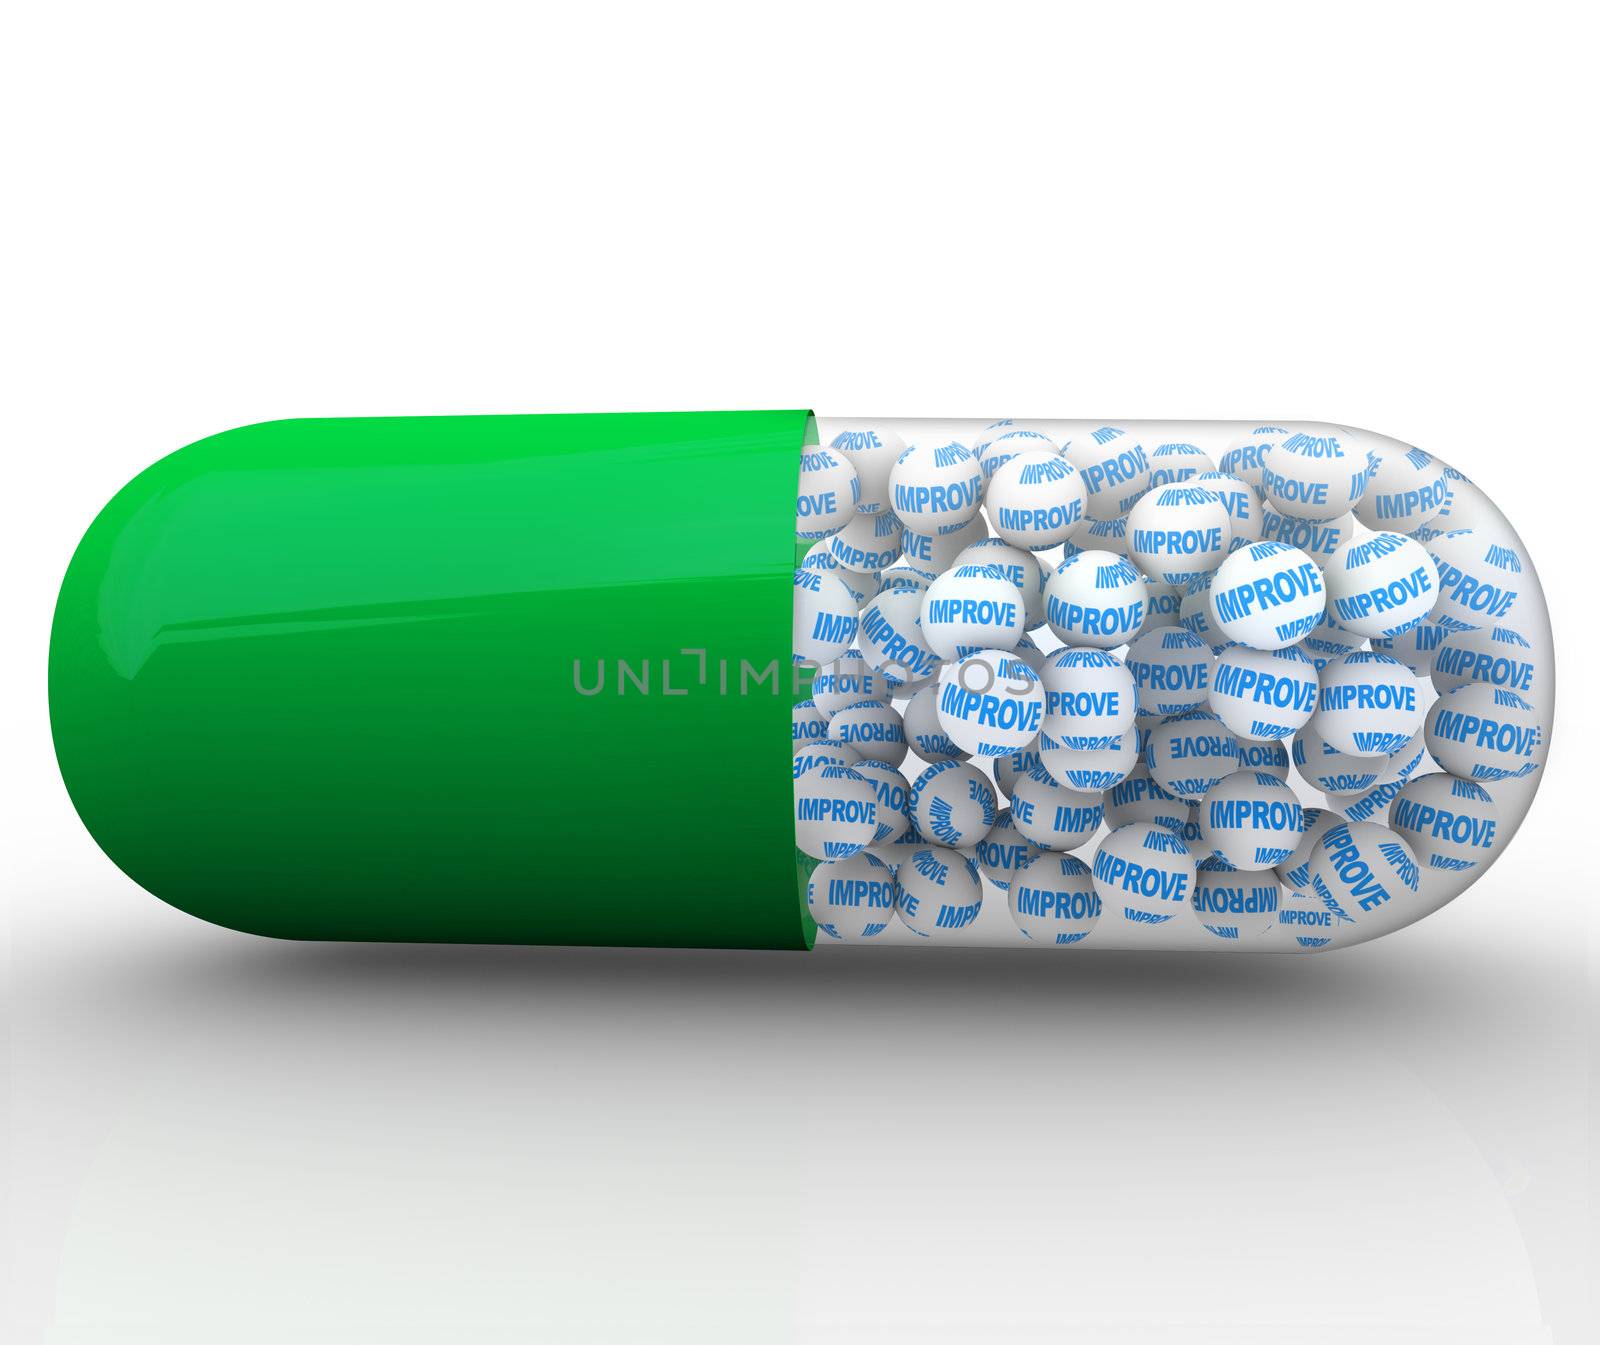 A green and translucent capsule pill filled with balls reading Improve, symbolizing the need for continuous improvement, change and innnovation